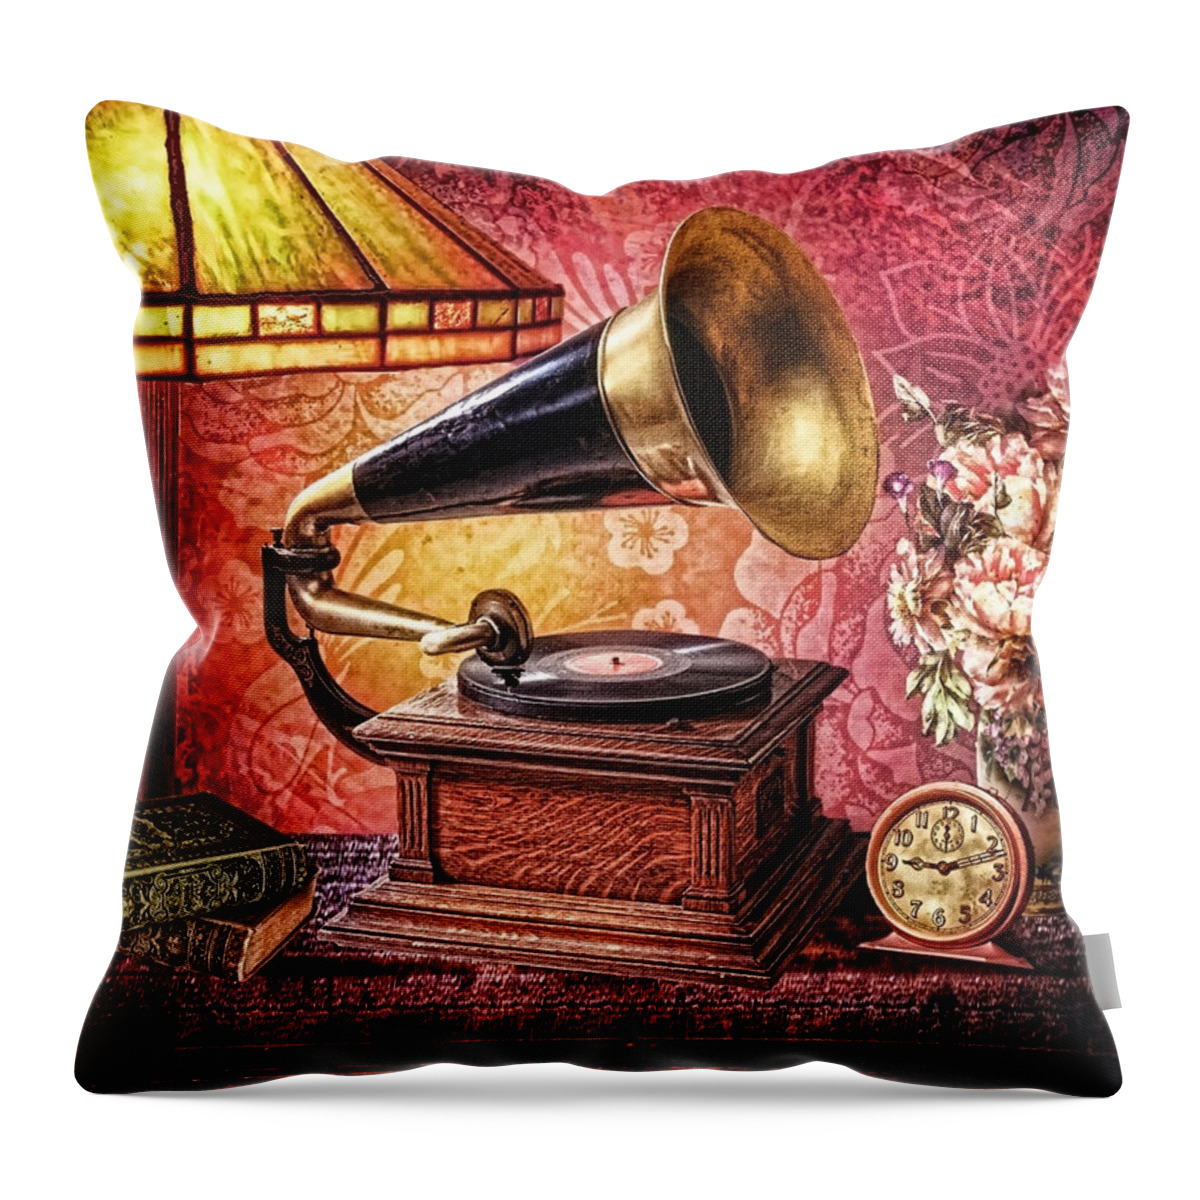 As Time Goes By Throw Pillow featuring the photograph As Time Goes By by Mo T